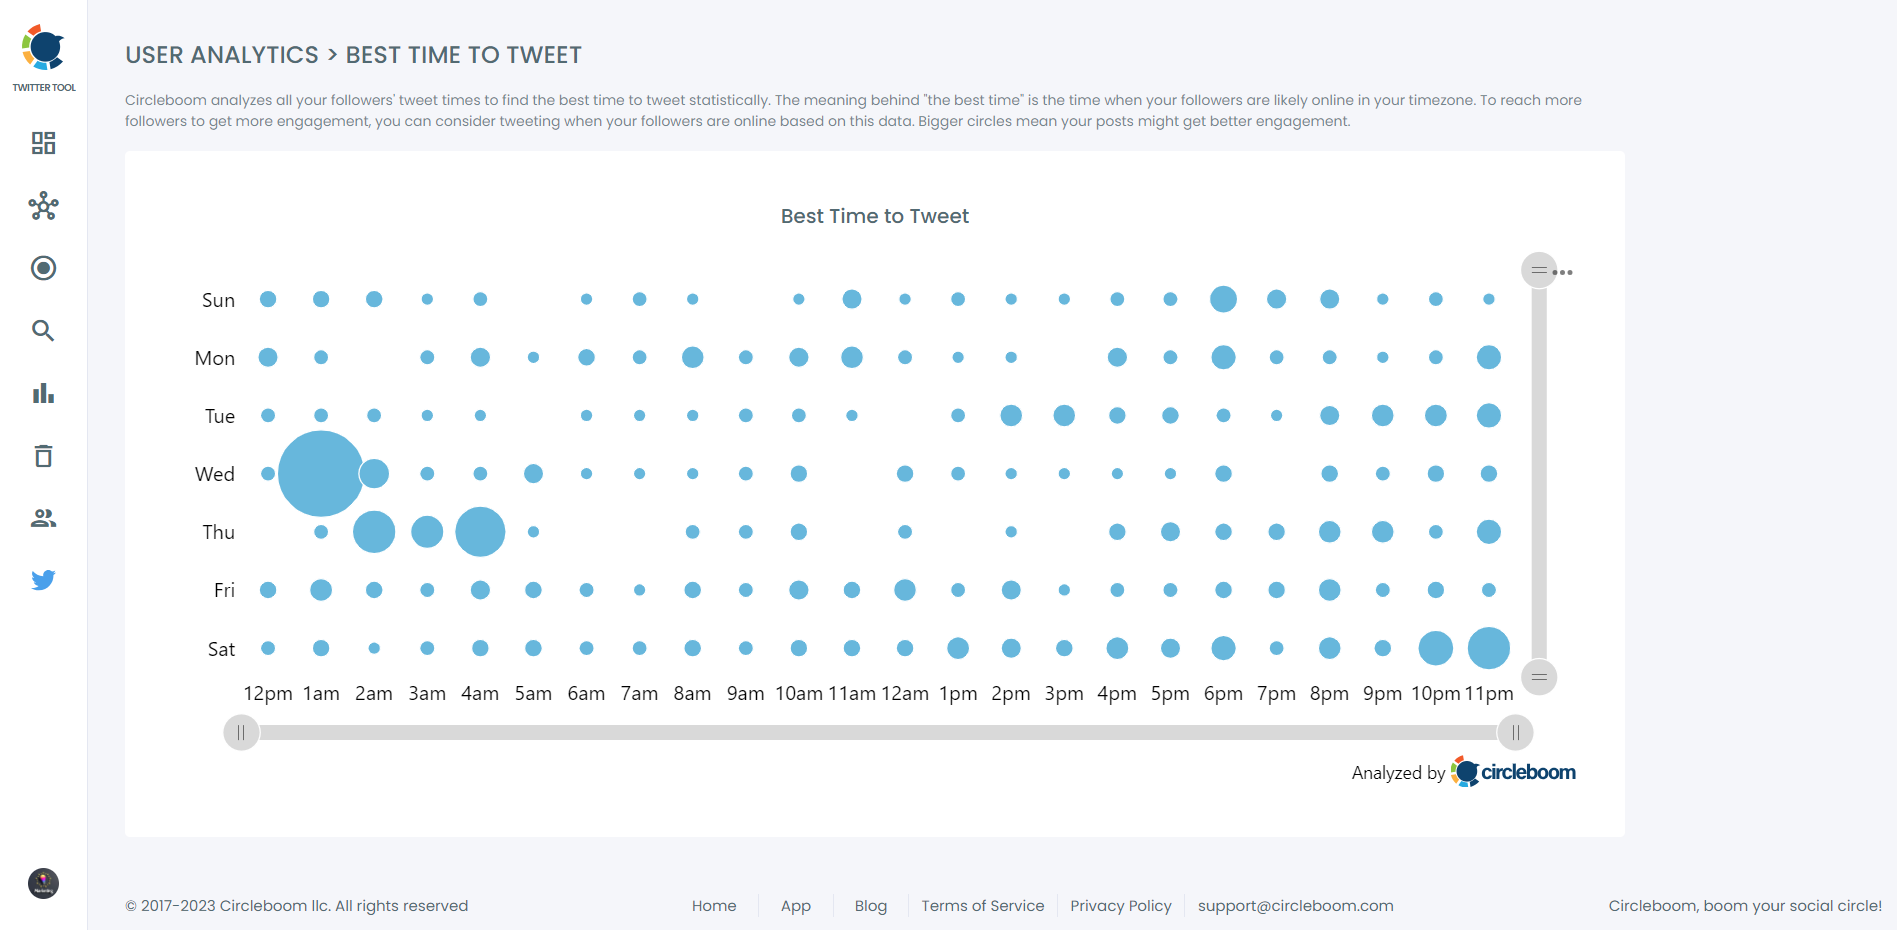  Find audience demographics on Twitter provided by Circleboom Twitter!